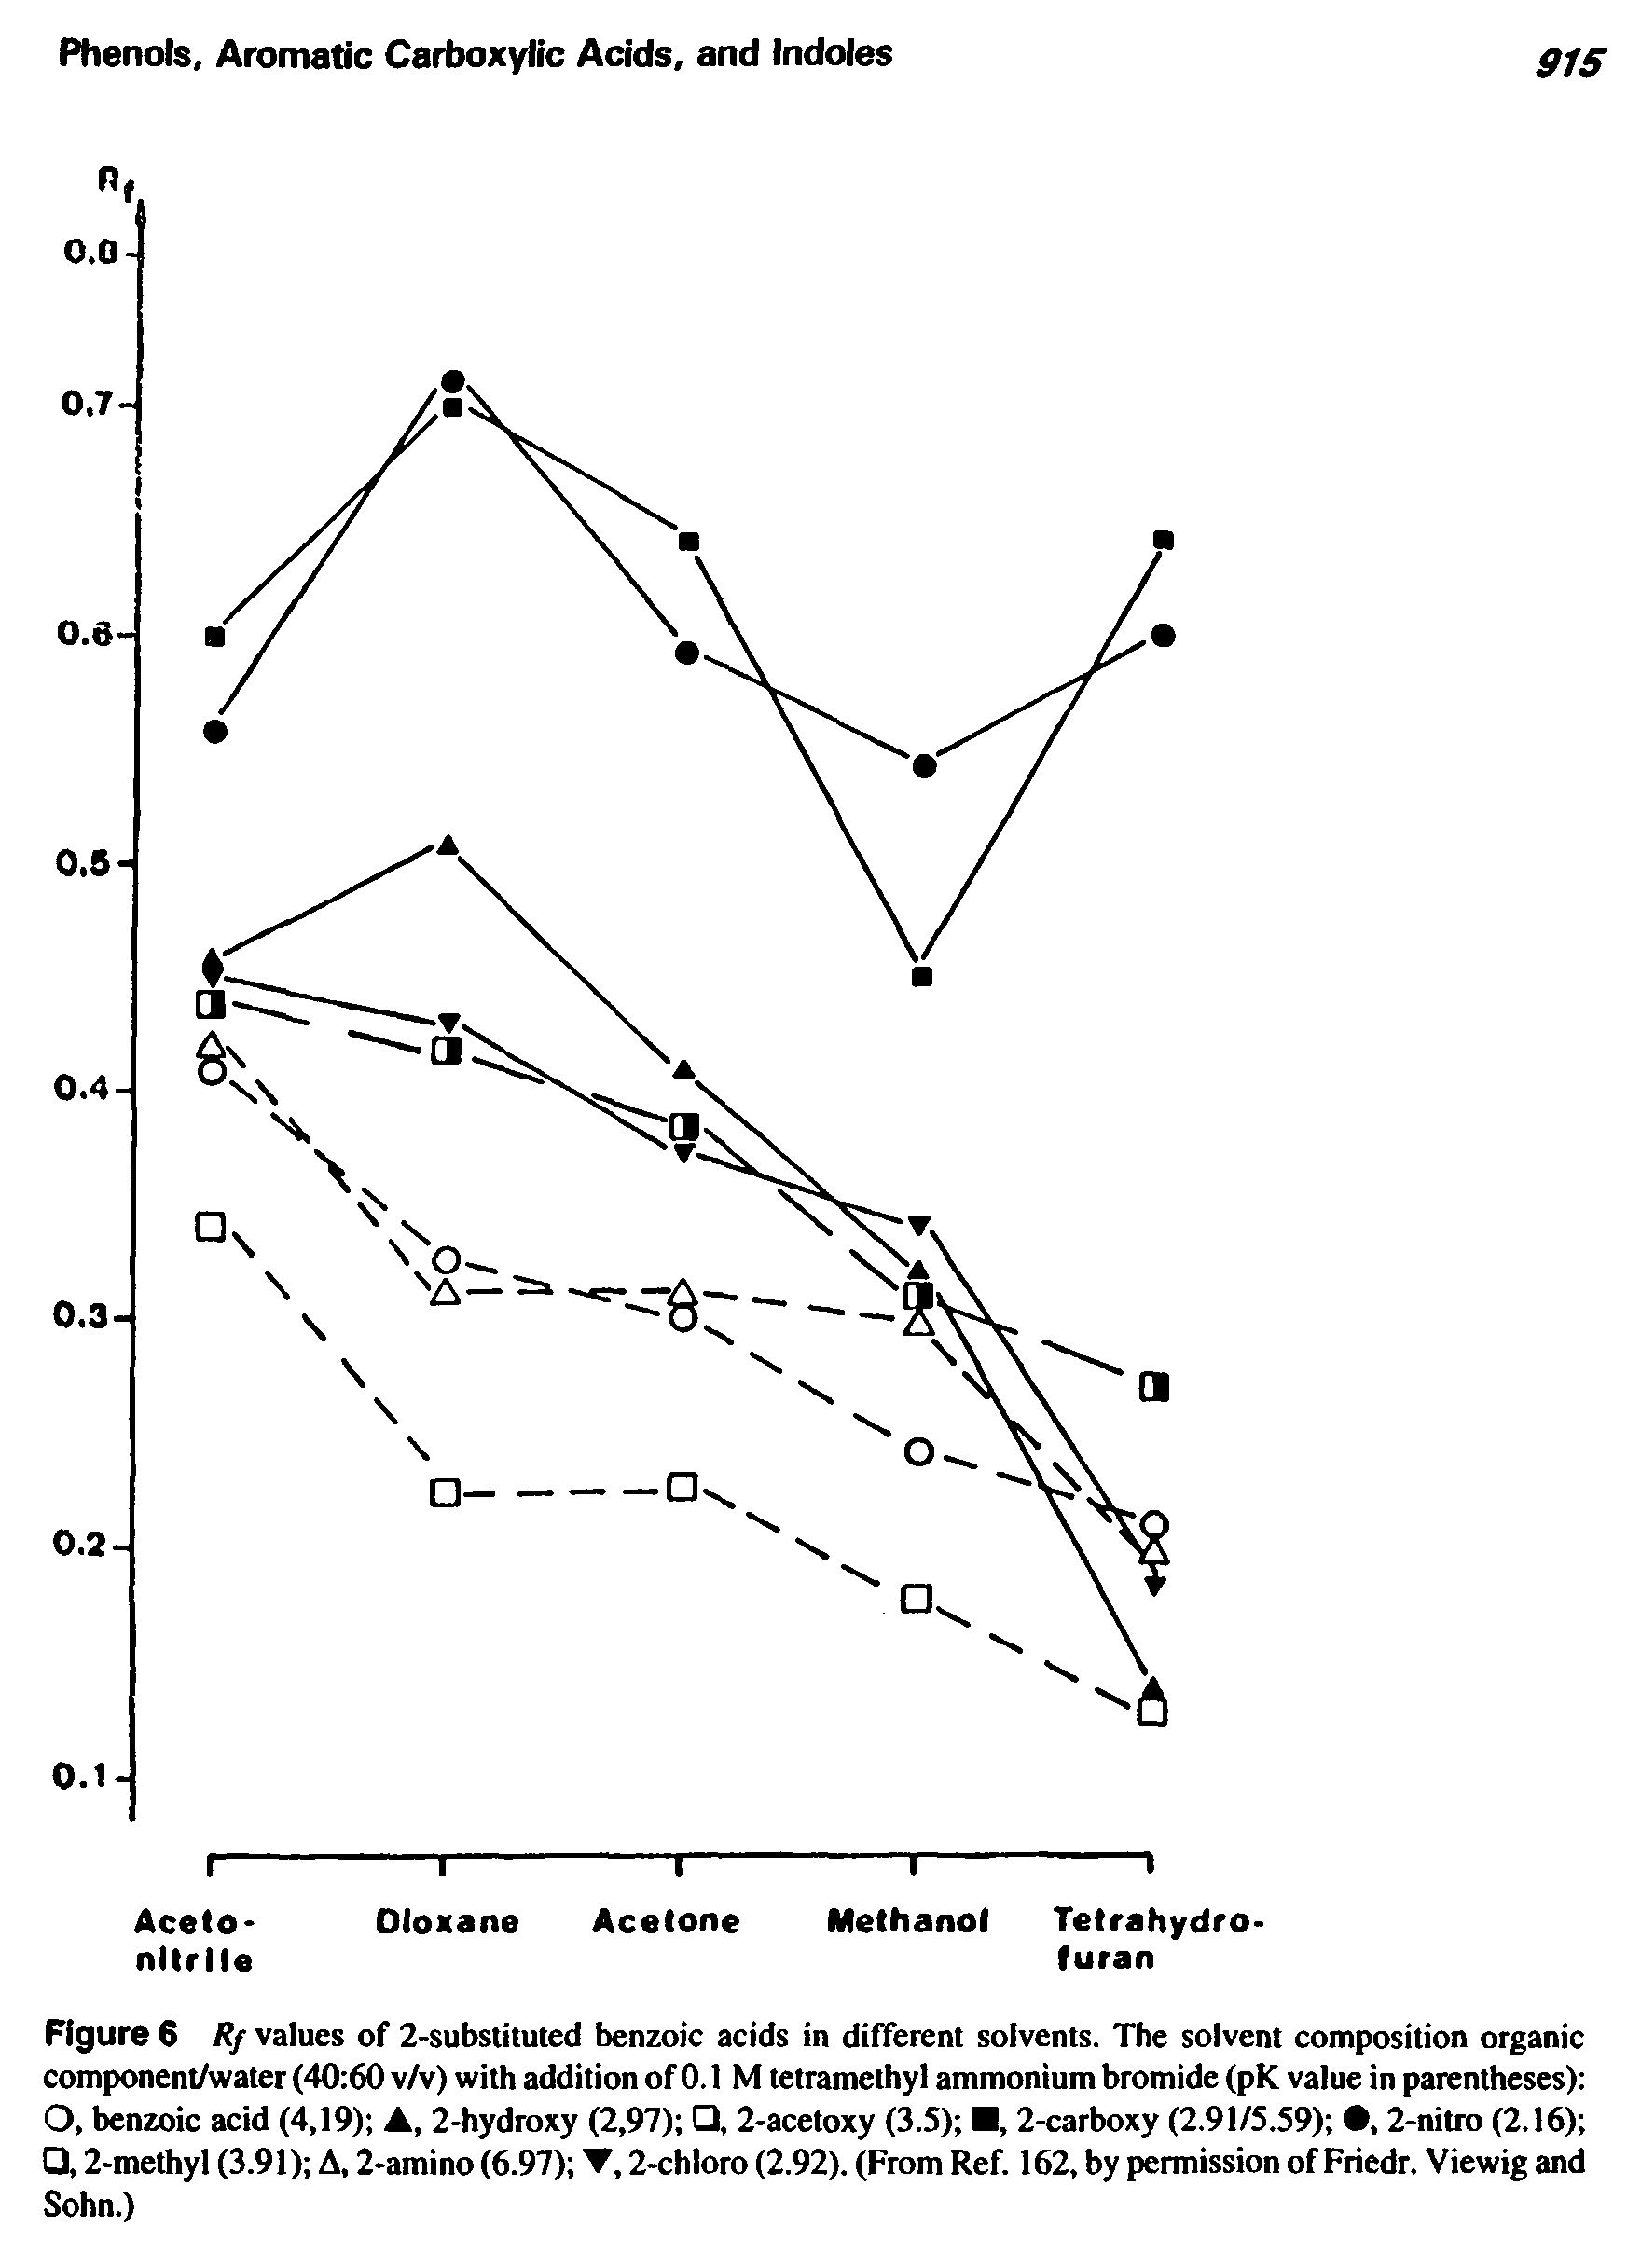 Figure 6 Rf values of 2- ubstituted benzoic acids in different solvents. The solvent composition organic componentAvater (40 60 v/v) with addition of 0.1 M tetramethyl ammonium bromide (pK value in parentheses) O, tenzoic acid (4,19) , 2-hydroxy (2,97) , 2-acetoxy (3.5) , 2-carboxy (2.91/5.59) , 2-nitro (2.16) , 2-methyl (3.91) A, 2-amino (6.97) T, 2-chloro (2.92). (From Ref. 162, by permission of Friedr. Viewig and Sohn.)...